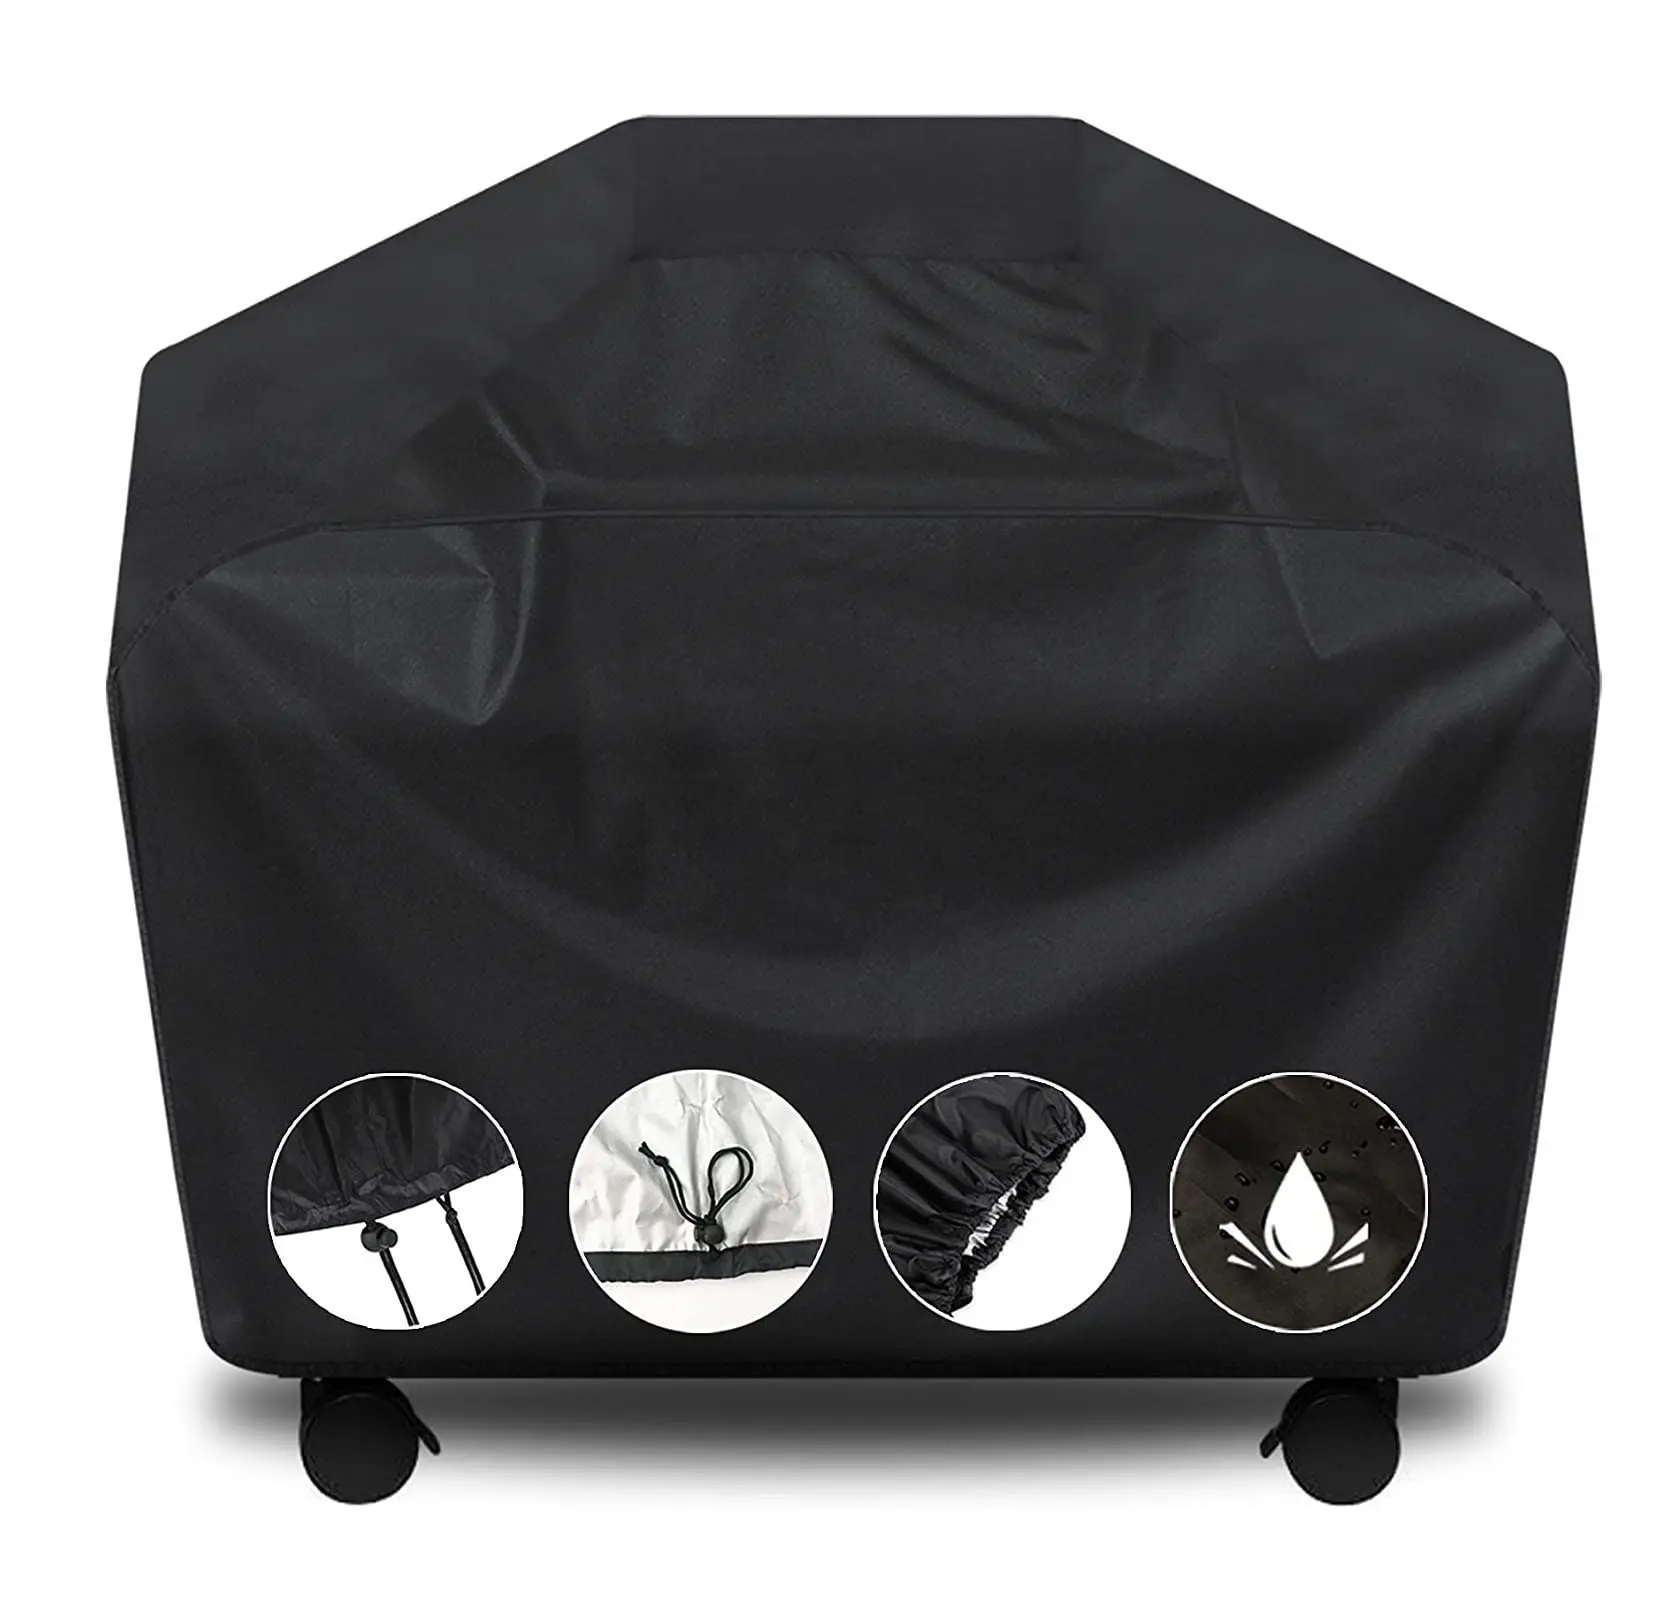 58 inch,Waterproof BBQ Grill Cover,UV Resistant Gas Grill Cover,Durable and Convenient,Rip Resistant